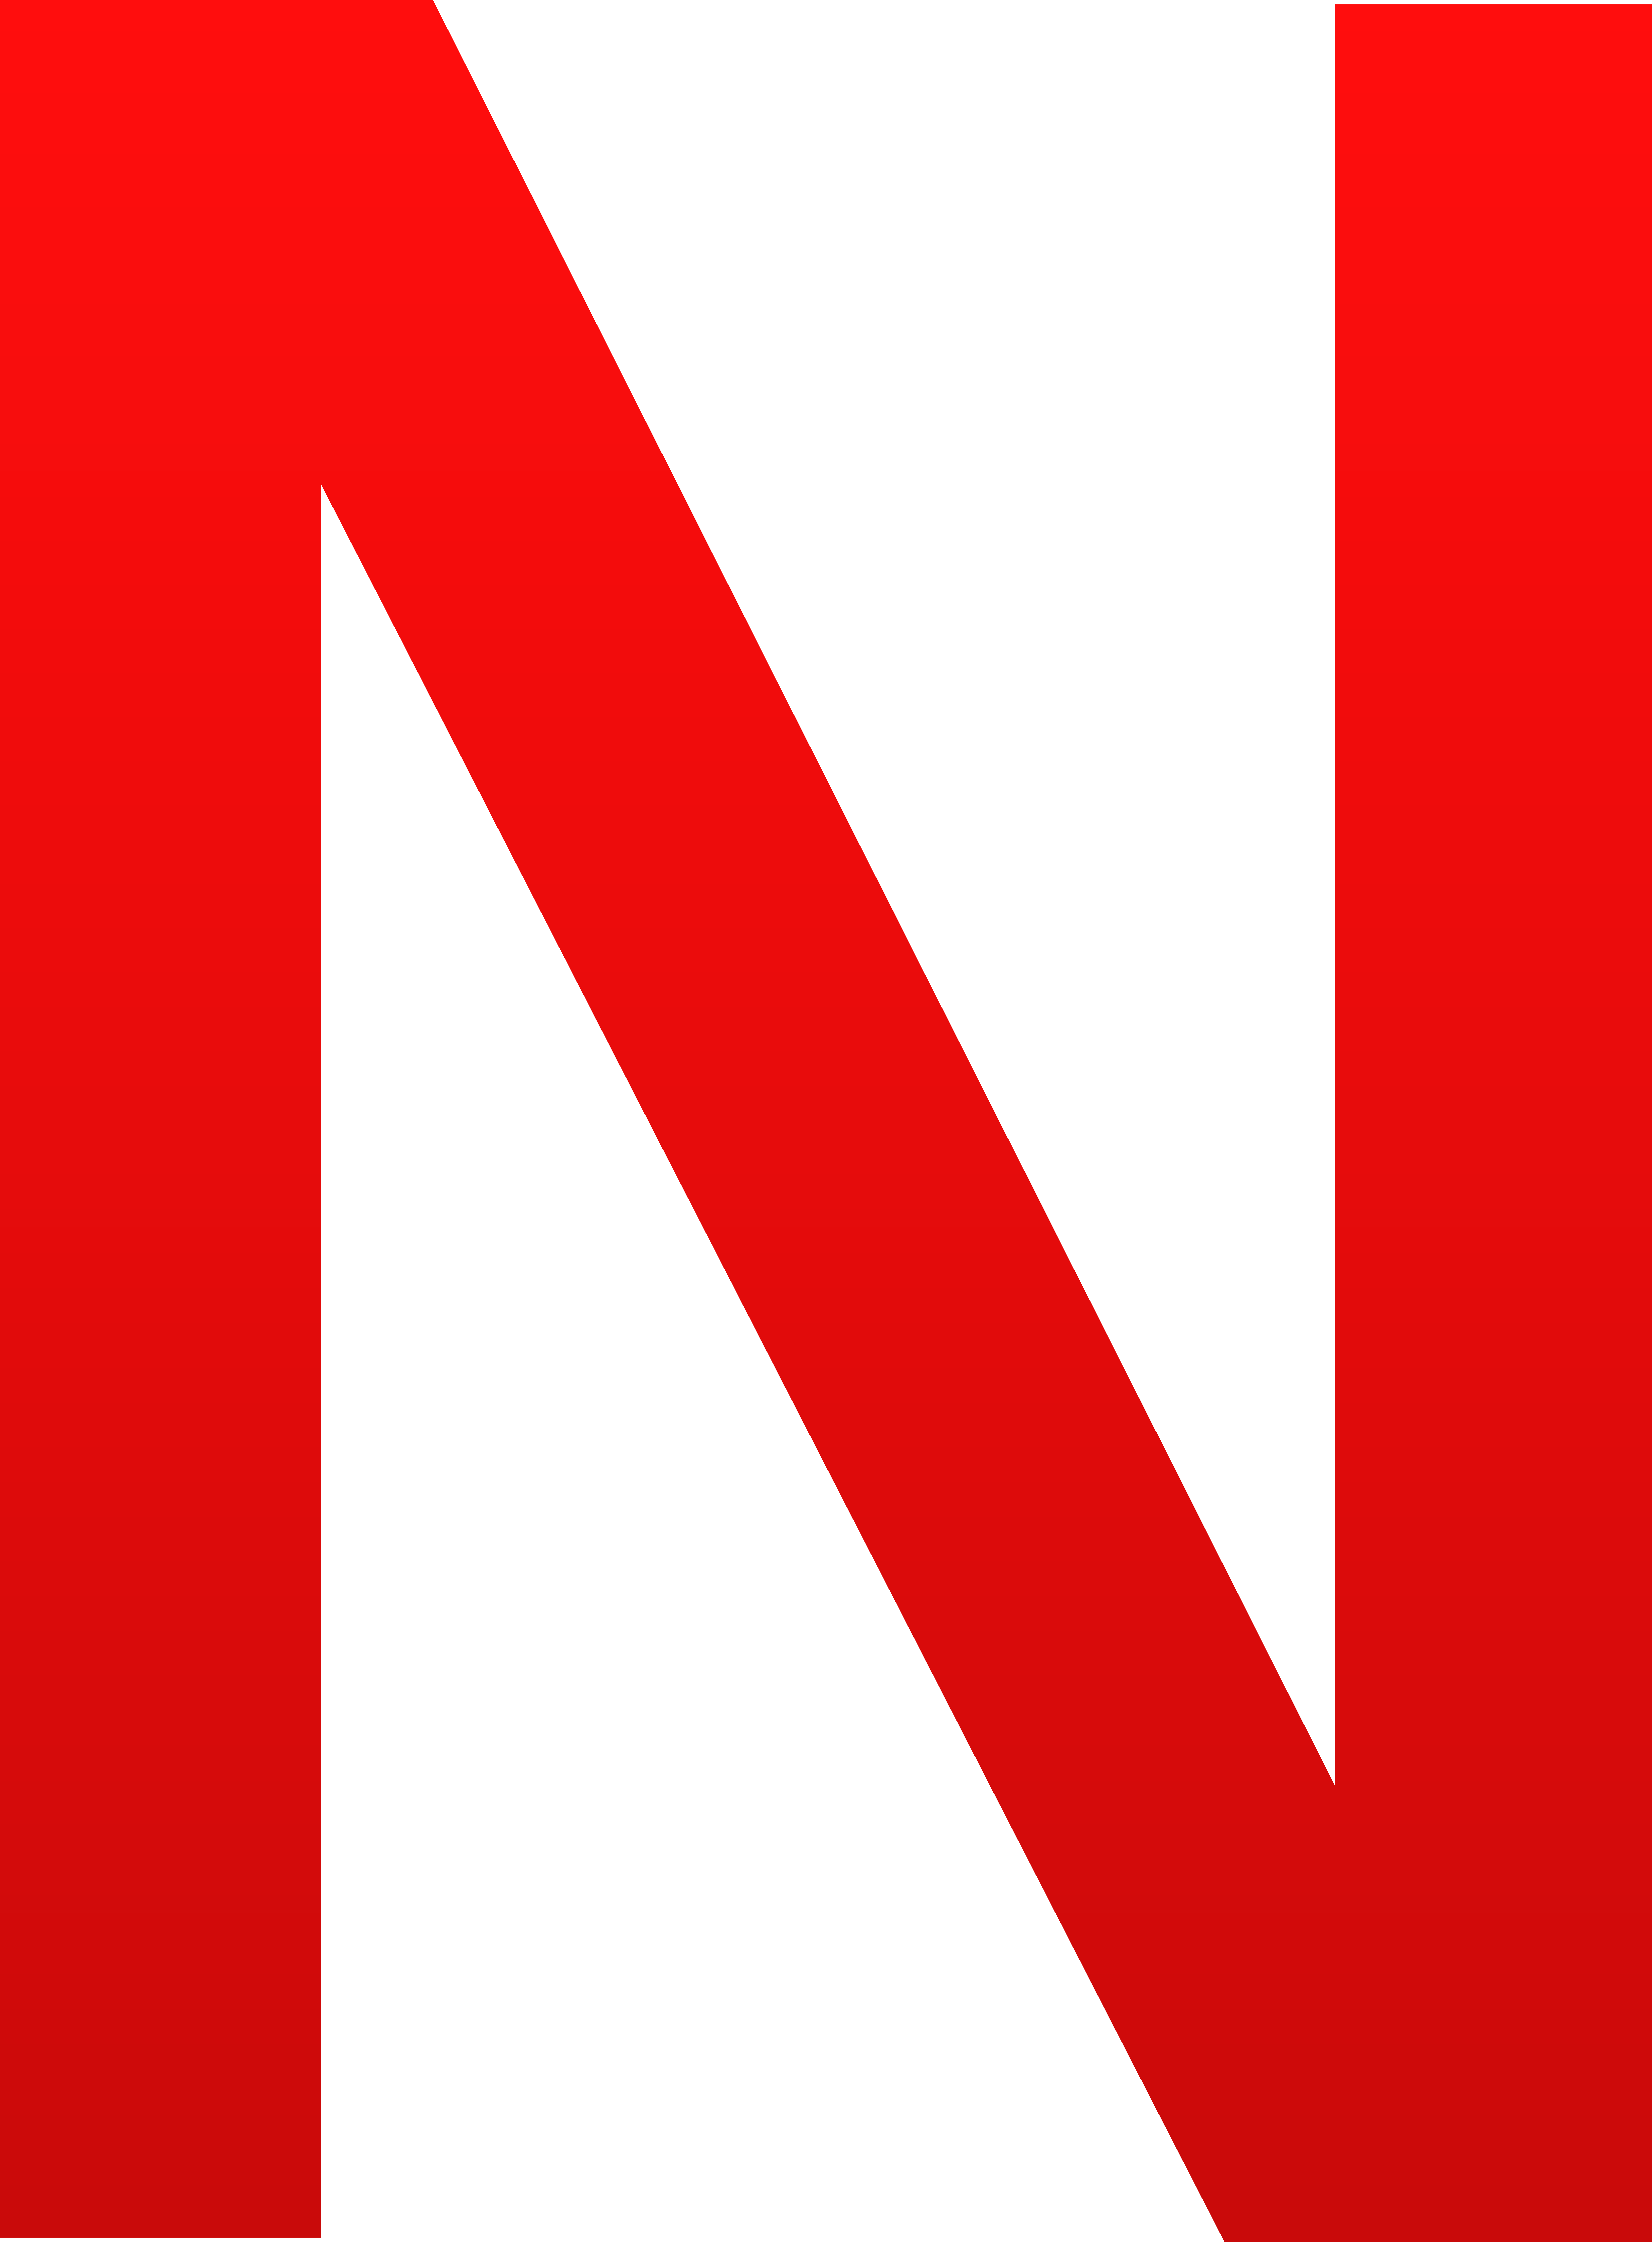 The Letter N - Letter N In Red (4946x6712)